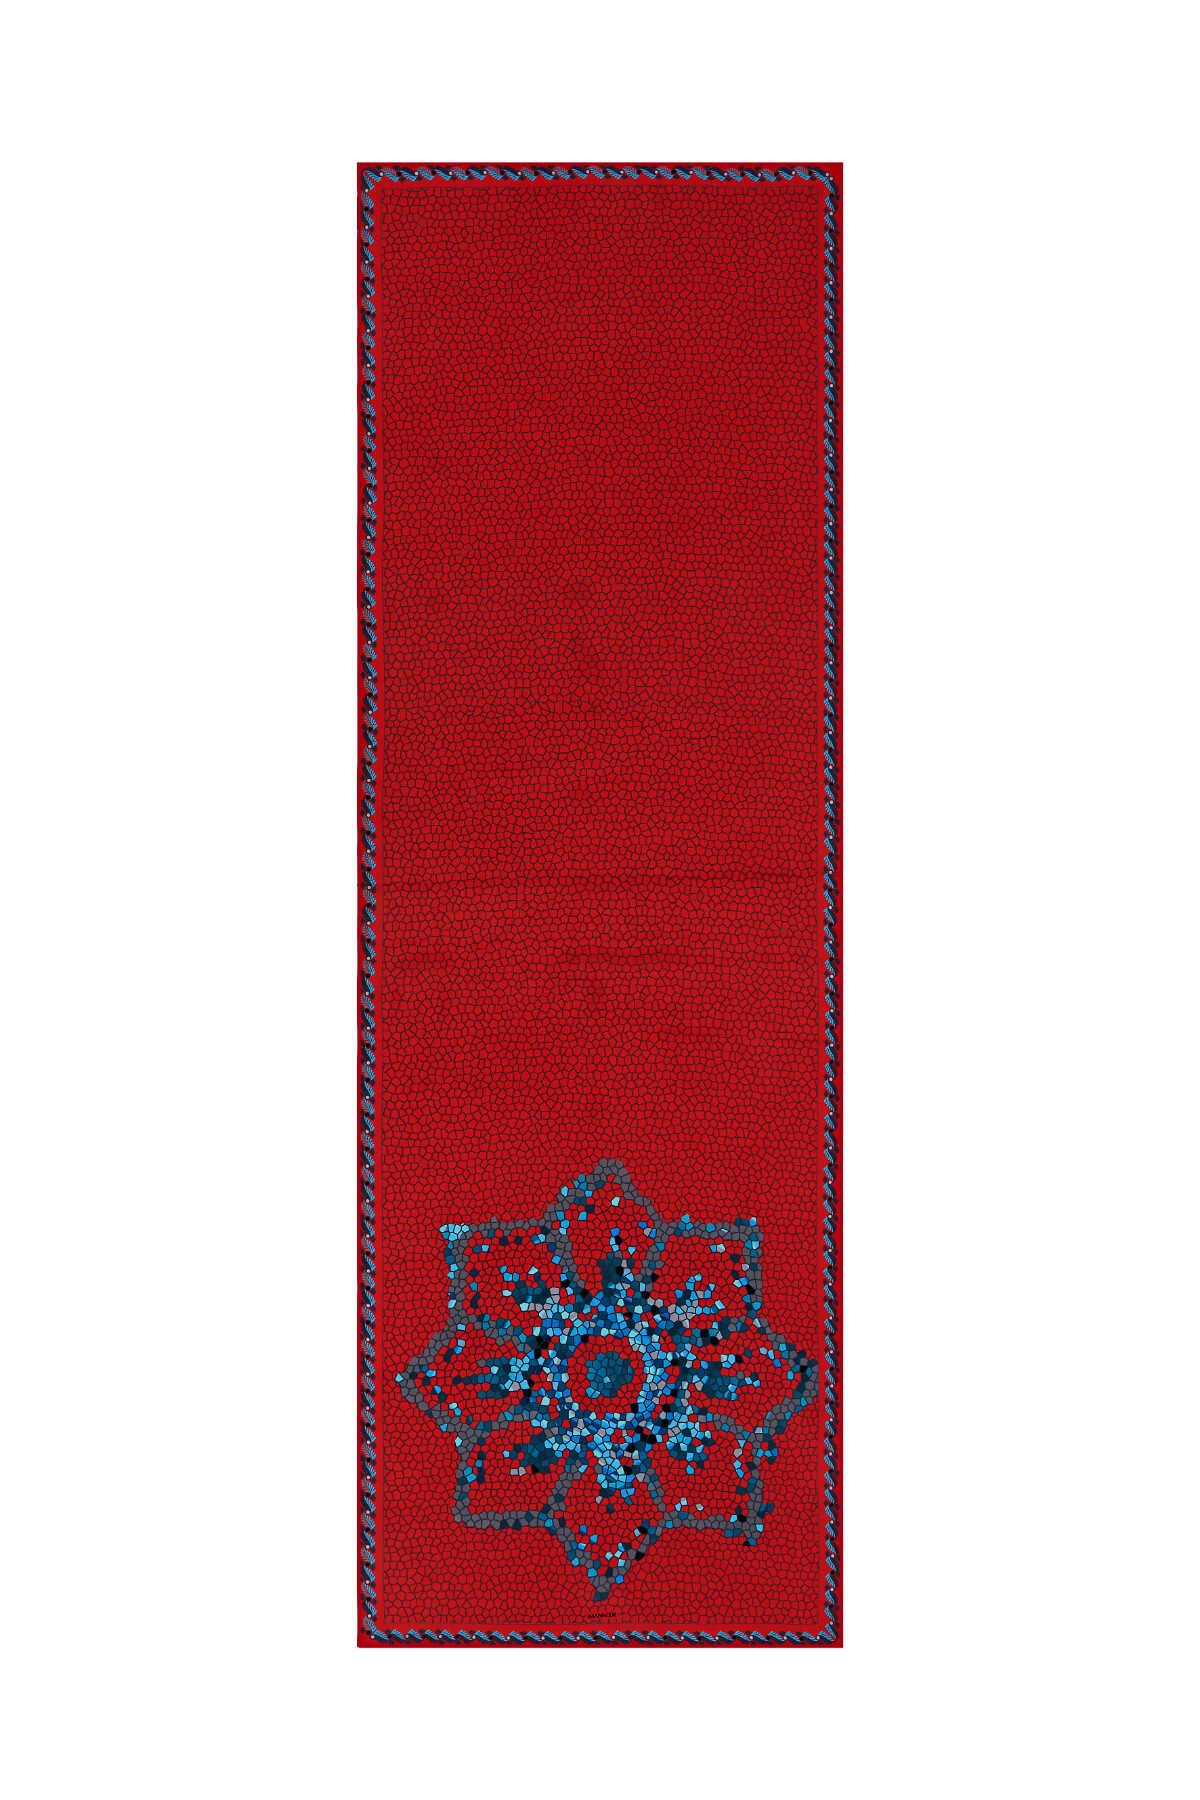 IMANNOOR Hijab Modell Seljuc Mosaic in der Farbe Rot